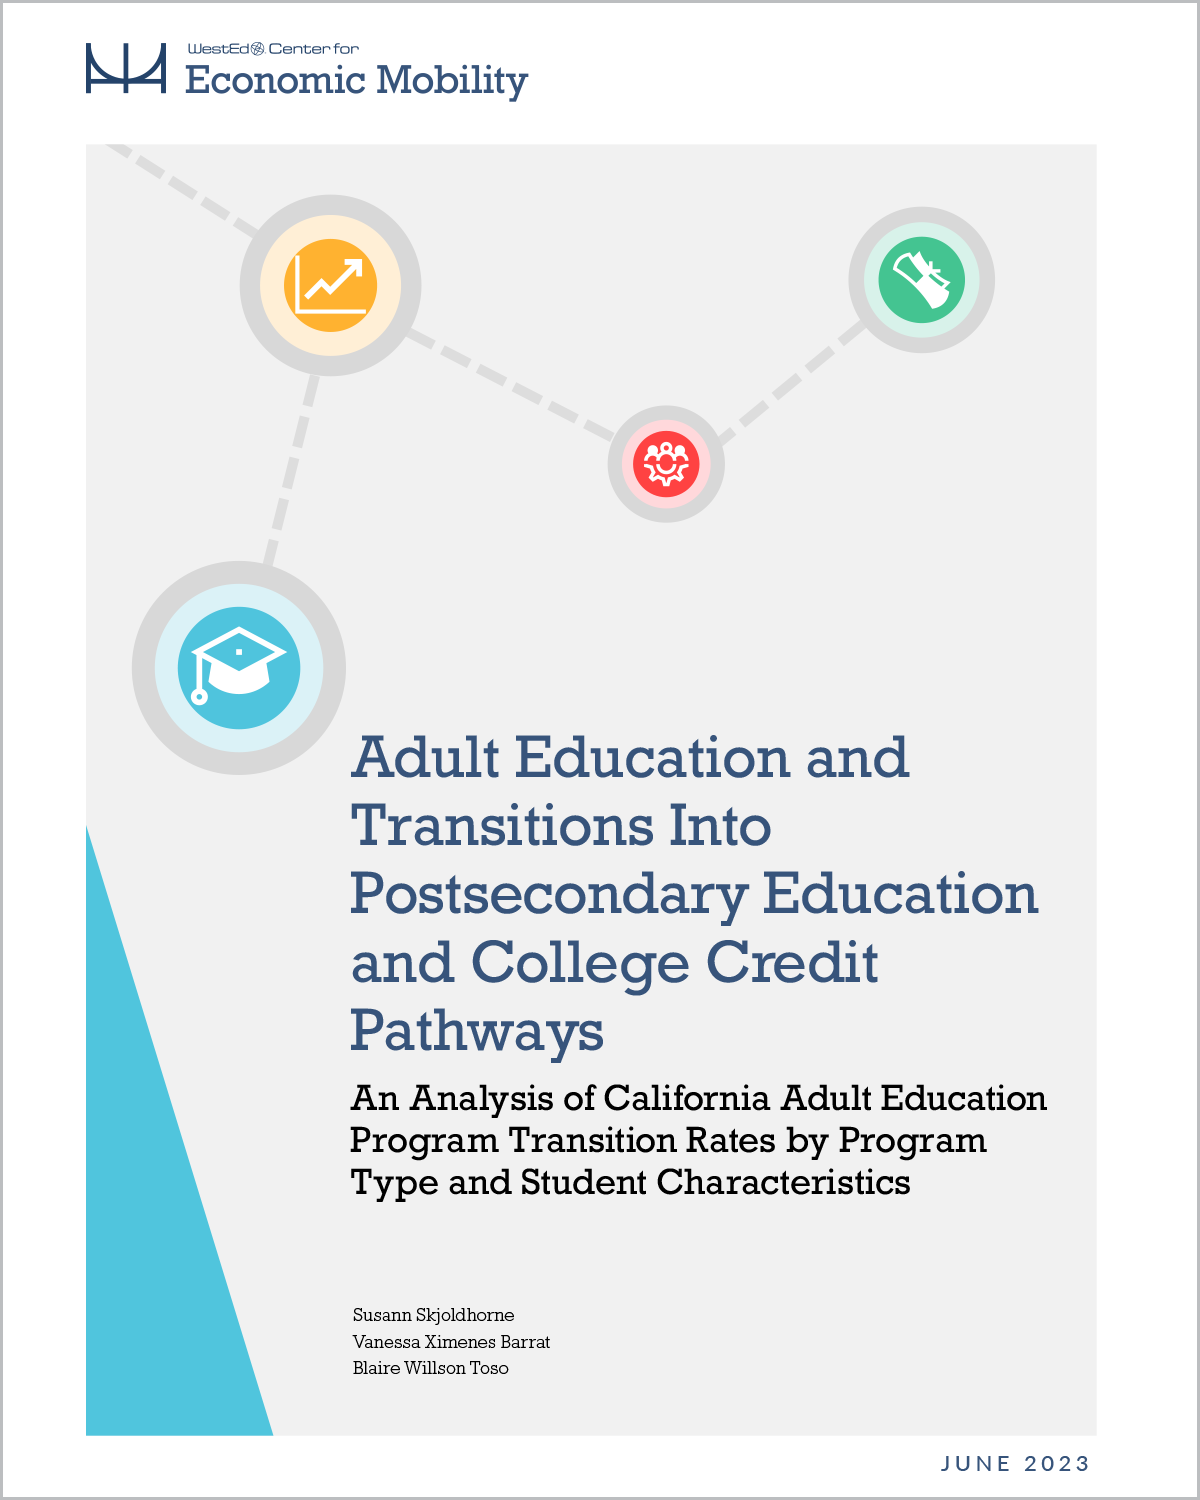 Adult Education and Transitions Into Postsecondary Education and College Credit Pathways